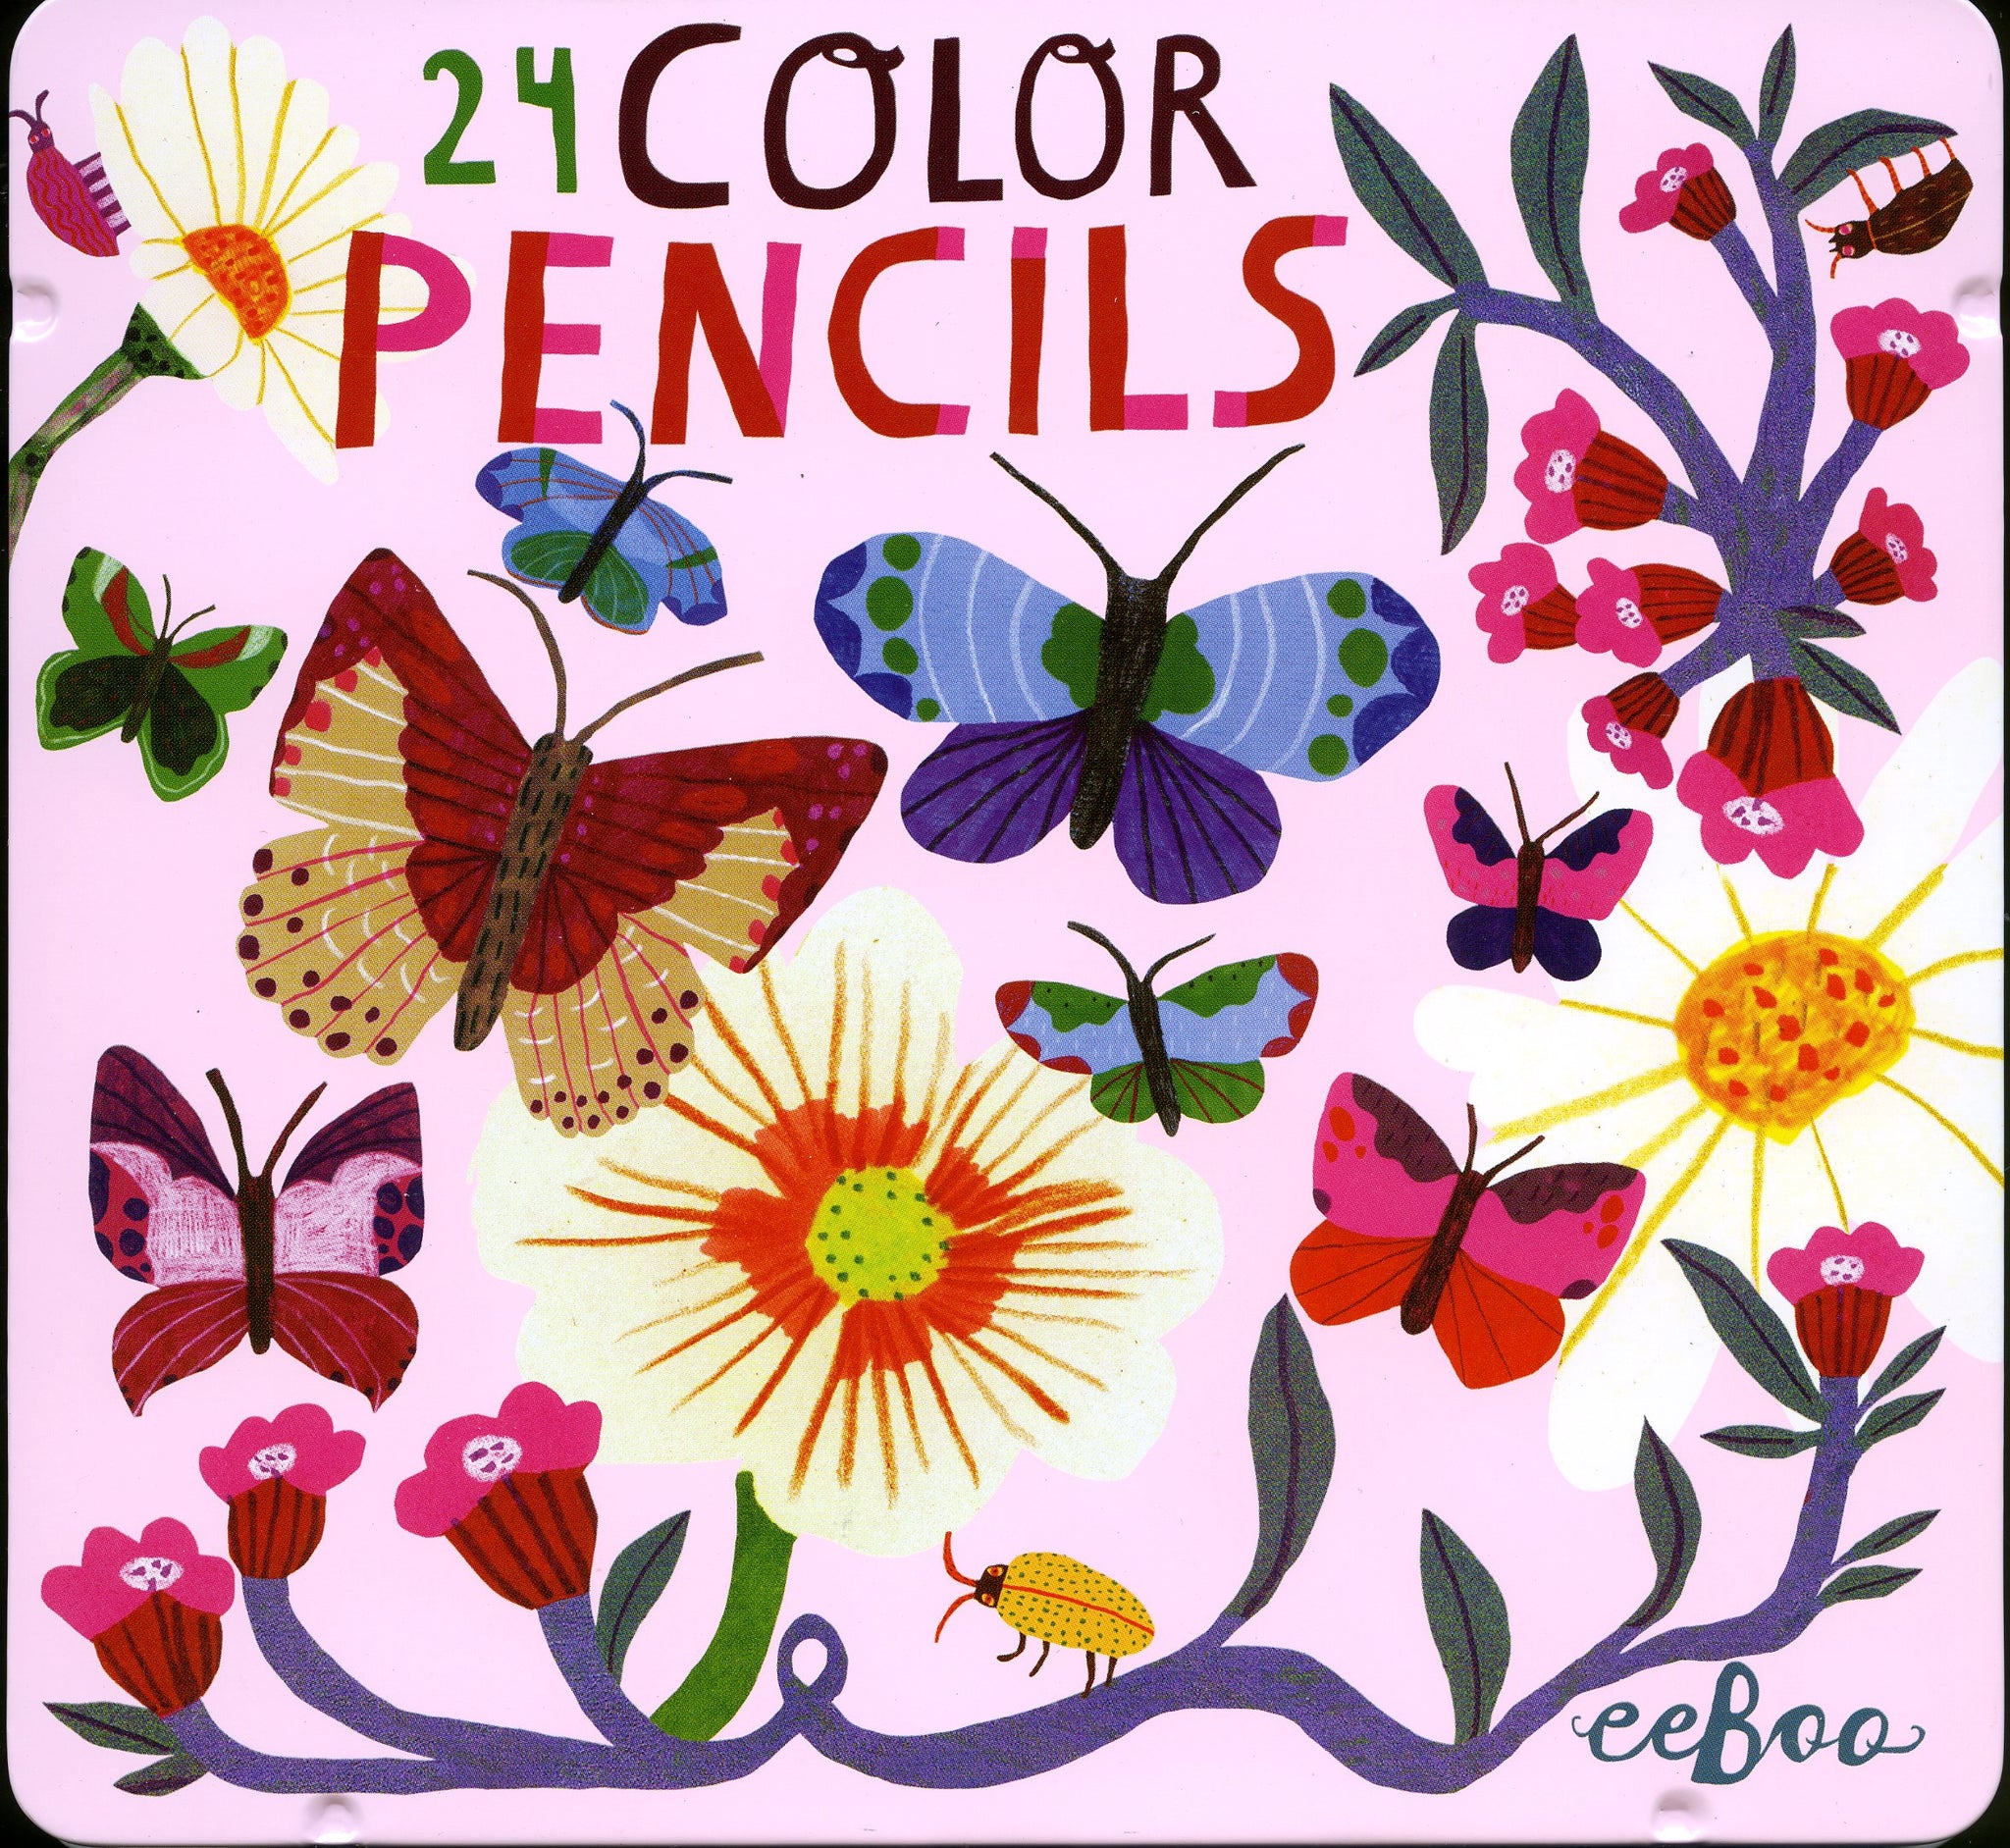 Butterflies Adult Coloring Book Set With 24 Colored Pencils And Pencil  Sharpener Included: Color Your Way To Calm - Newbourne Media -  9781988137605 - 1988137608 - Stevens Books